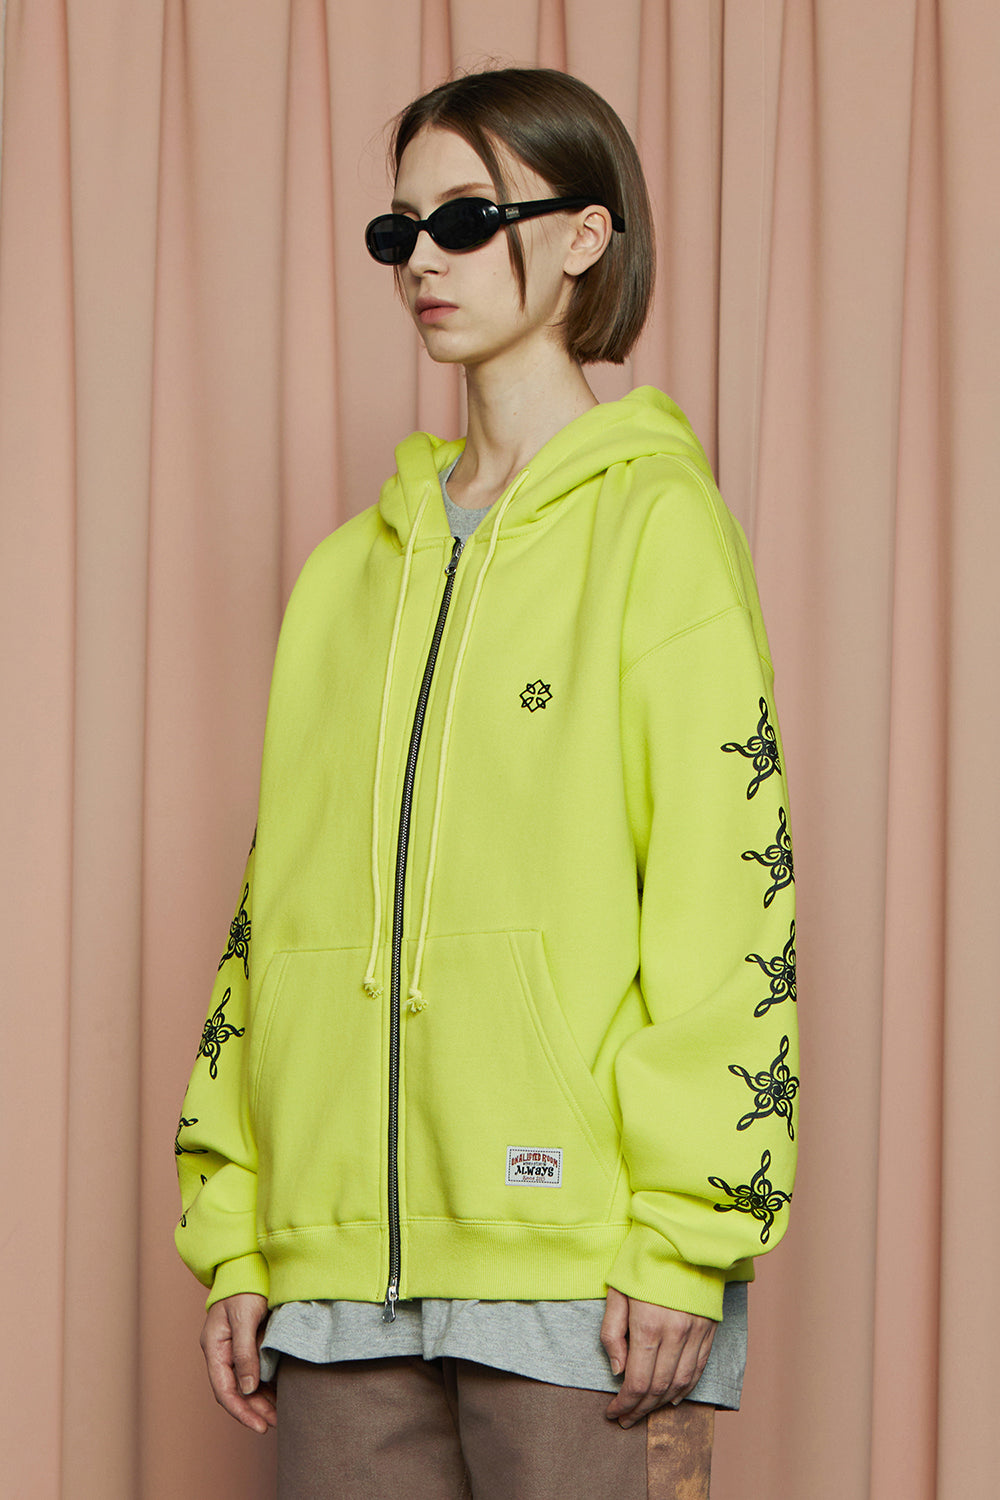 STAR ZIP-UP HOODIE / LIME YELLOW